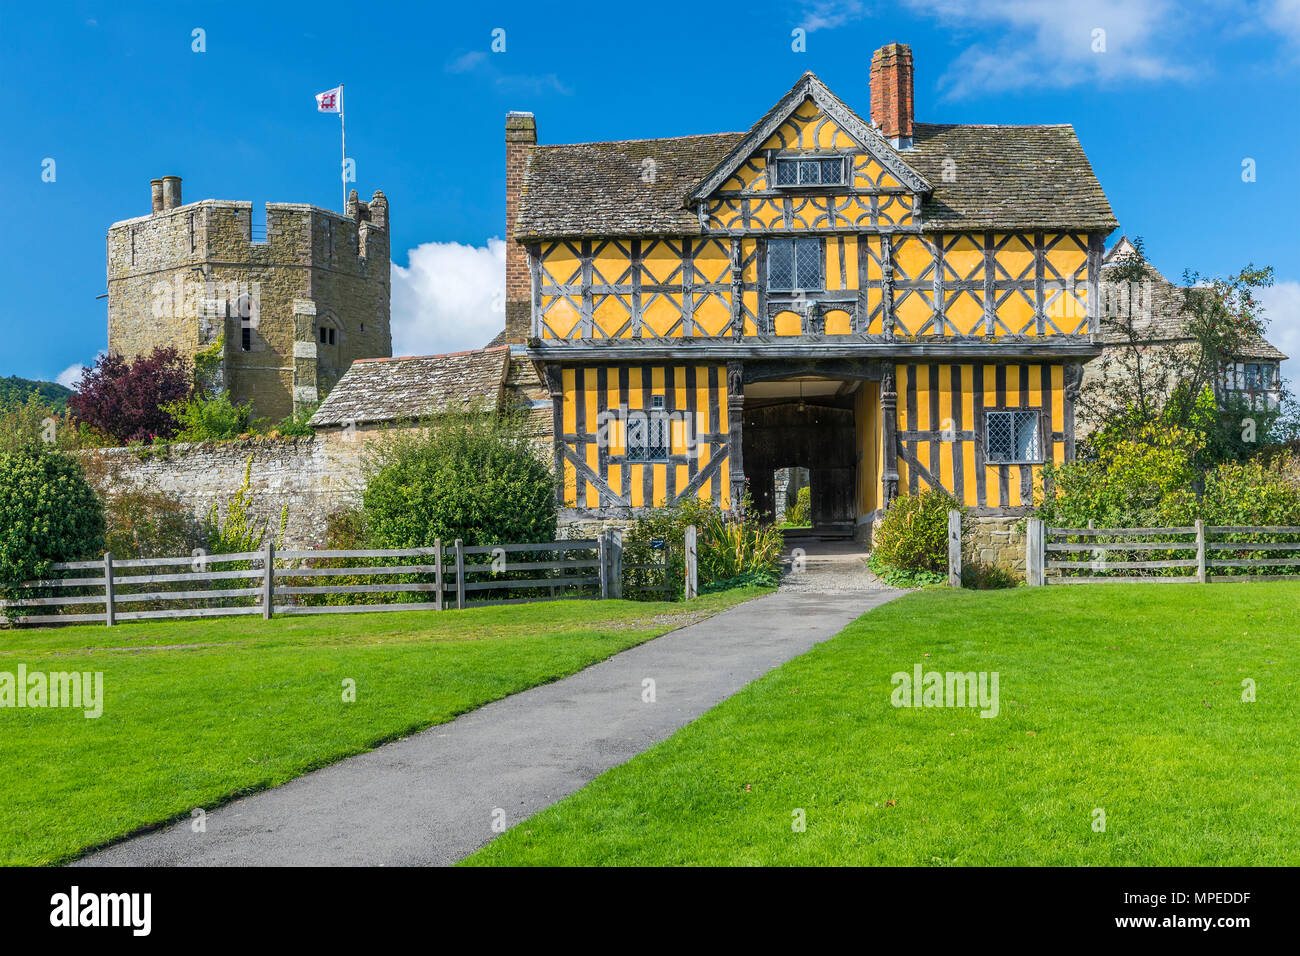 Stokesay Castle a fortified manor house, Stokesay, Shropshire, England, United KIngdom, Europe. Stock Photo